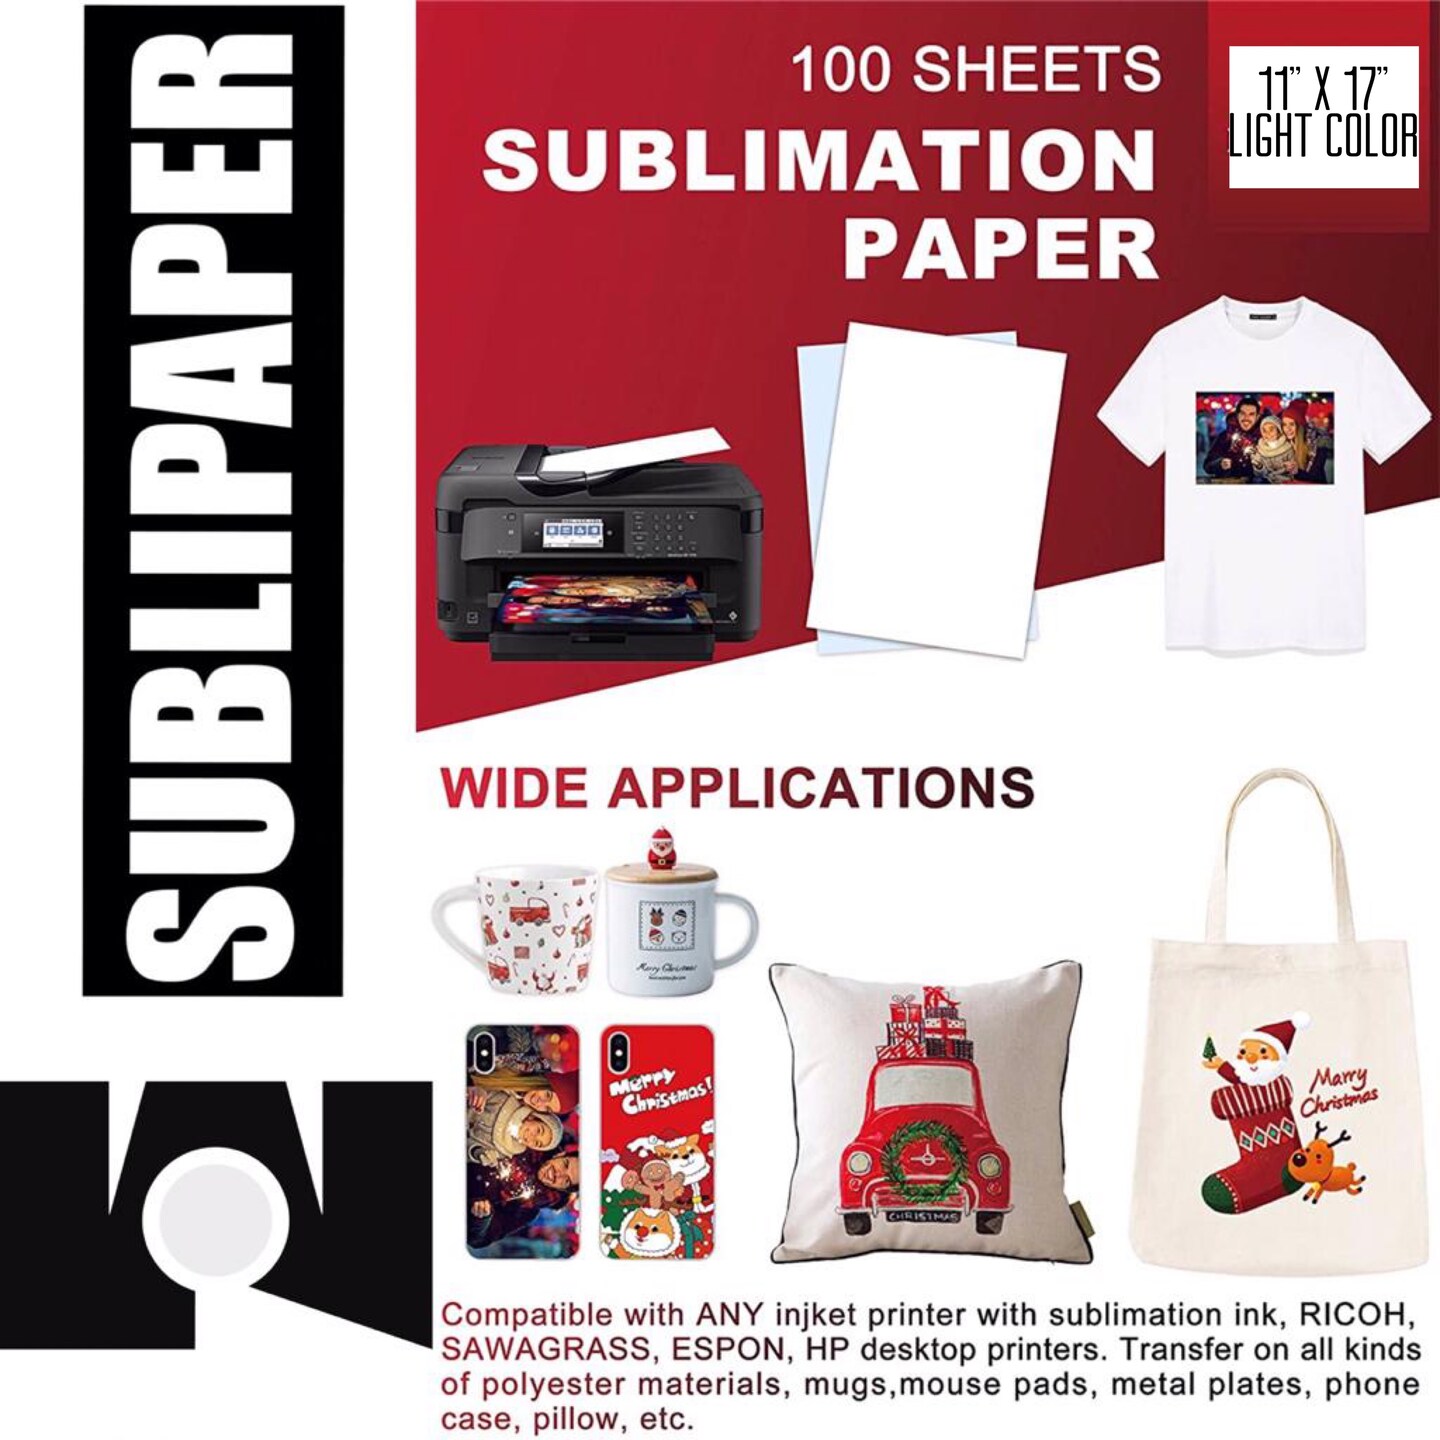 SUBLIMAX Sublimation Paper 11 x 17 - CERTIFIED BY SAWGRASS